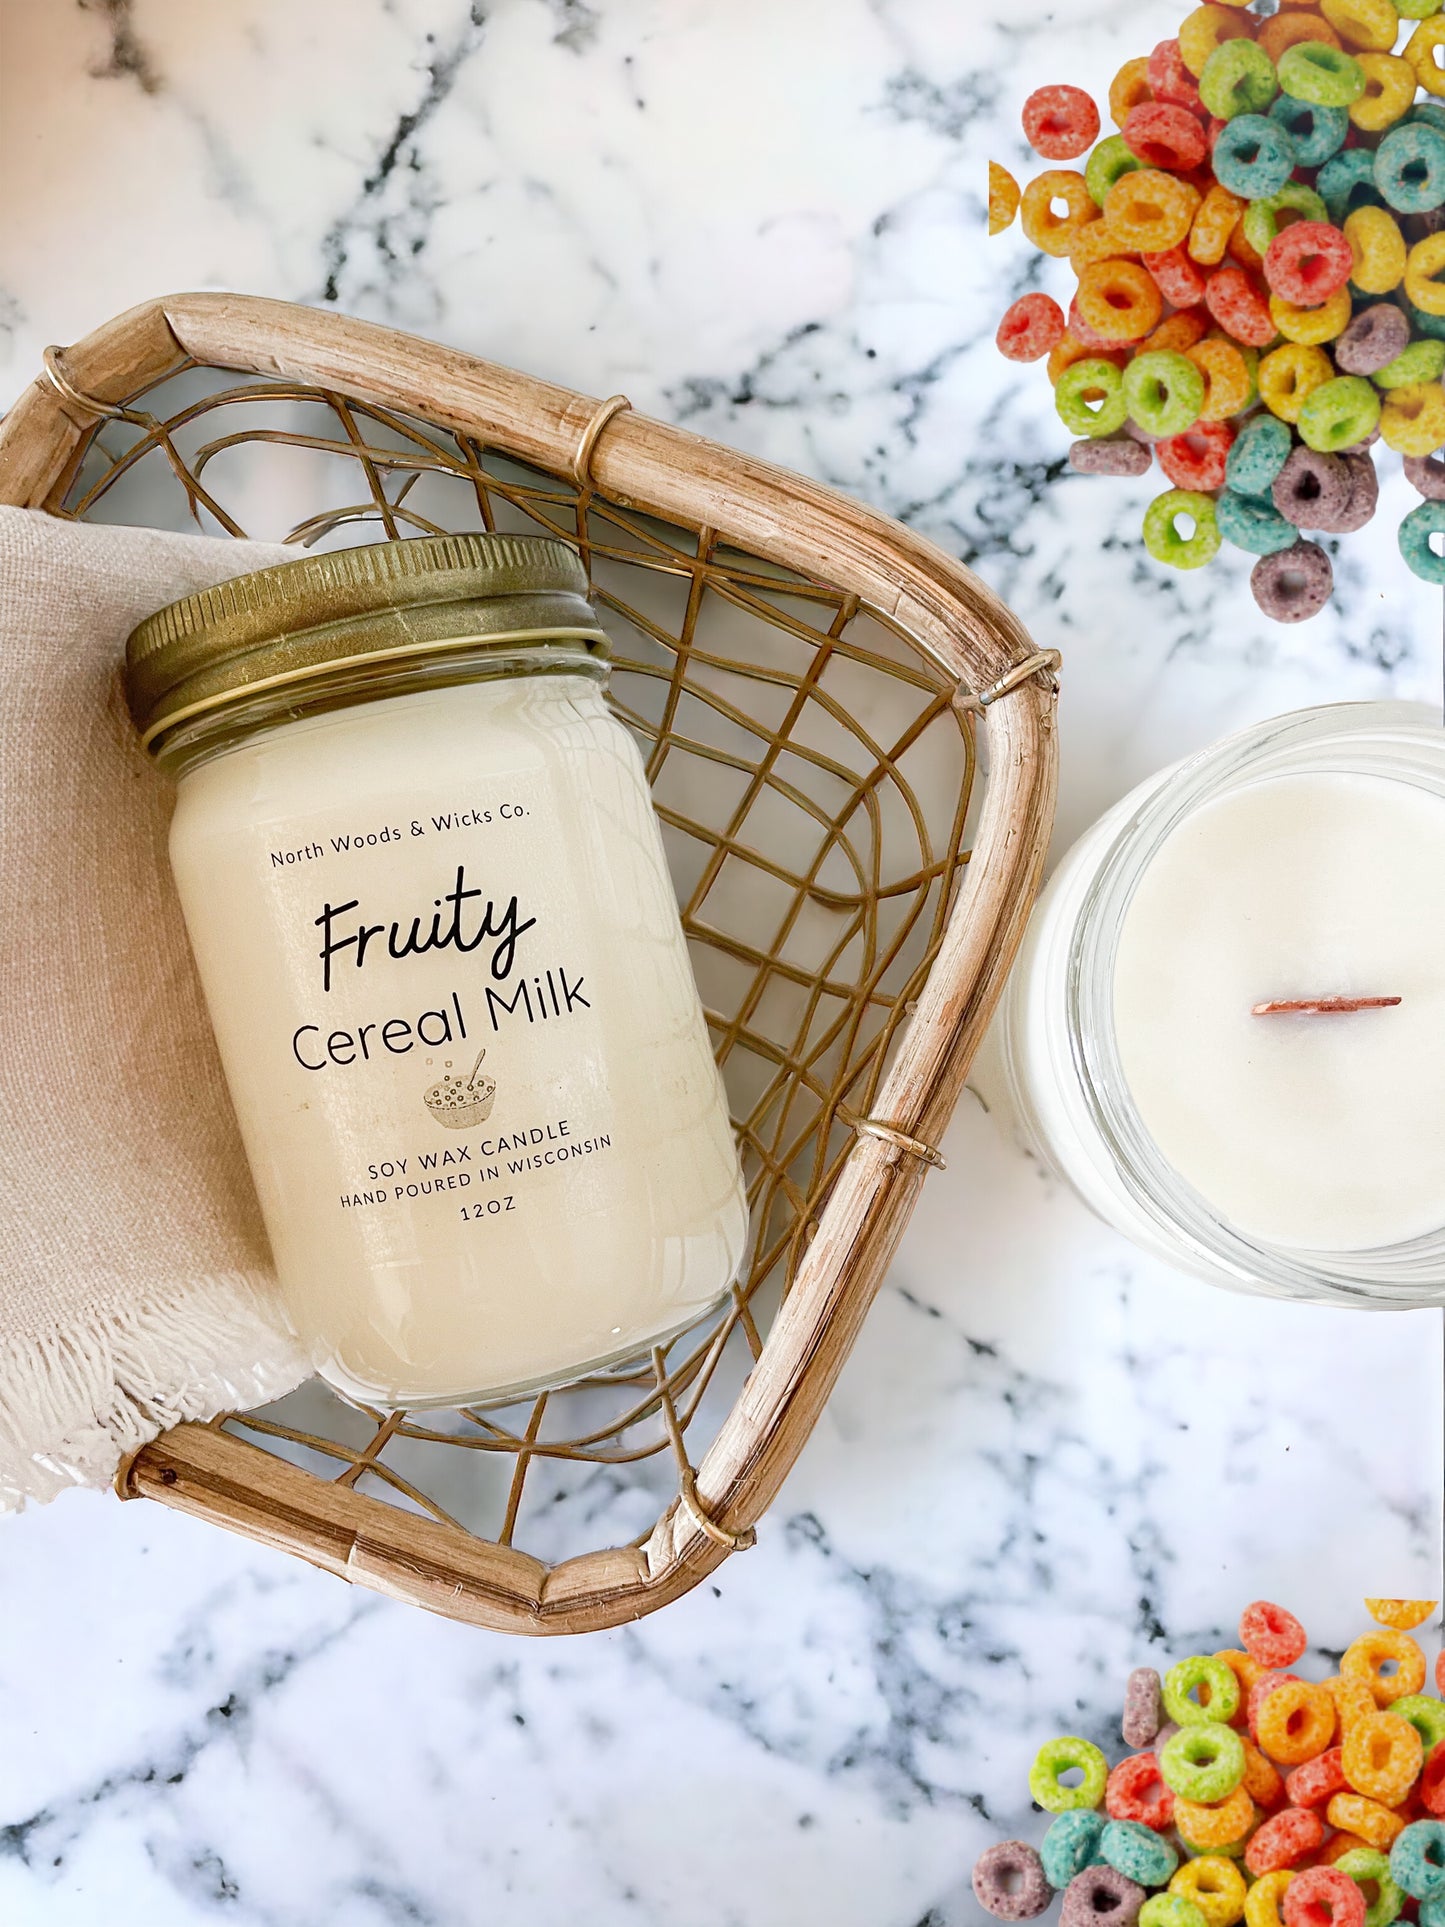 Fruity Cereal Milk 12oz Candle